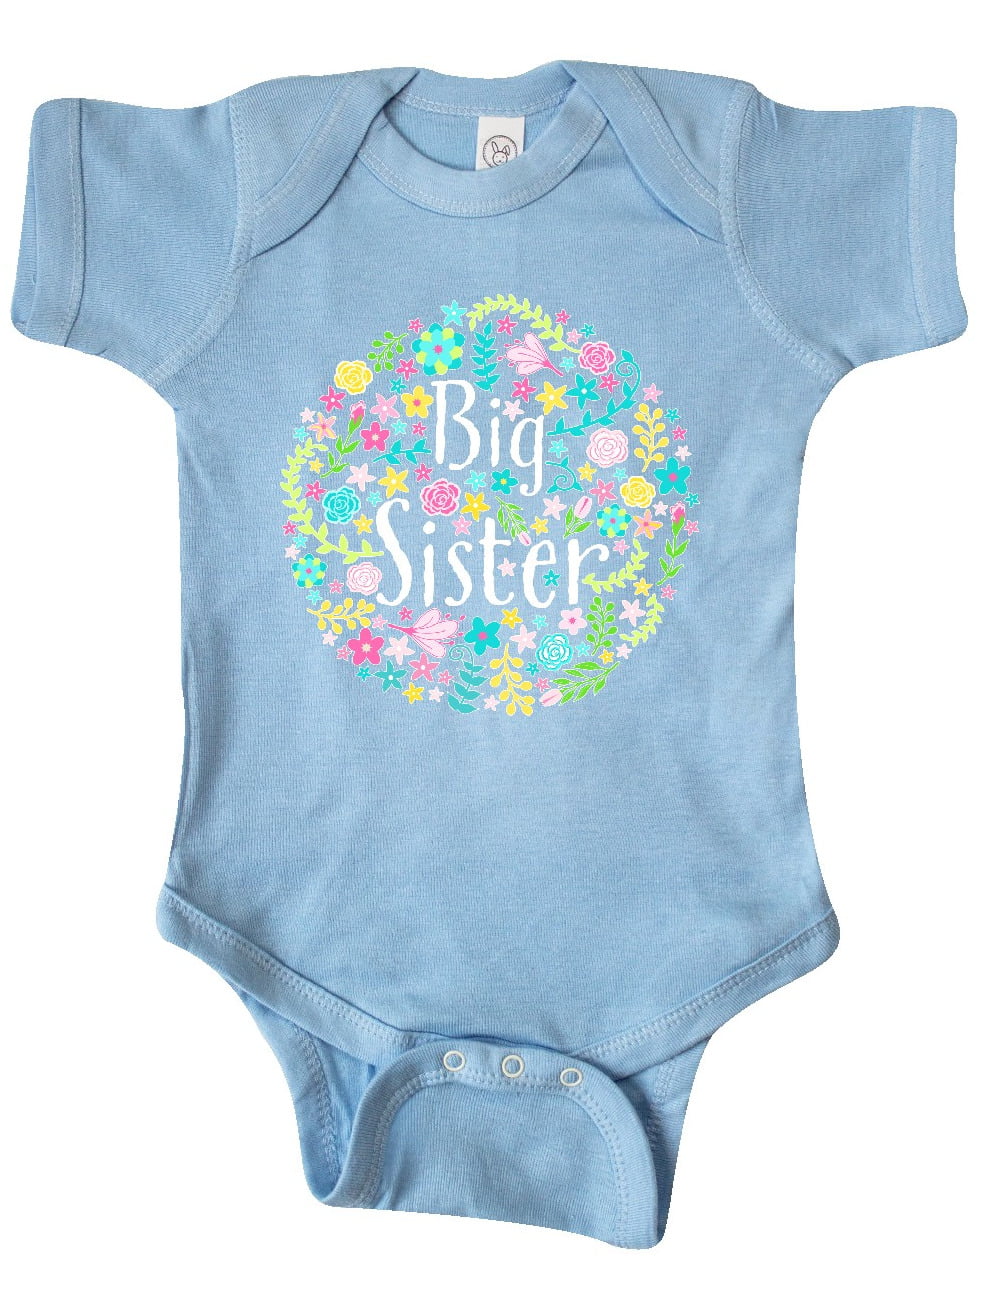 I Have the Best Sis Sister Ever Cute Boys and Girls Baby Vest Bodysuit 